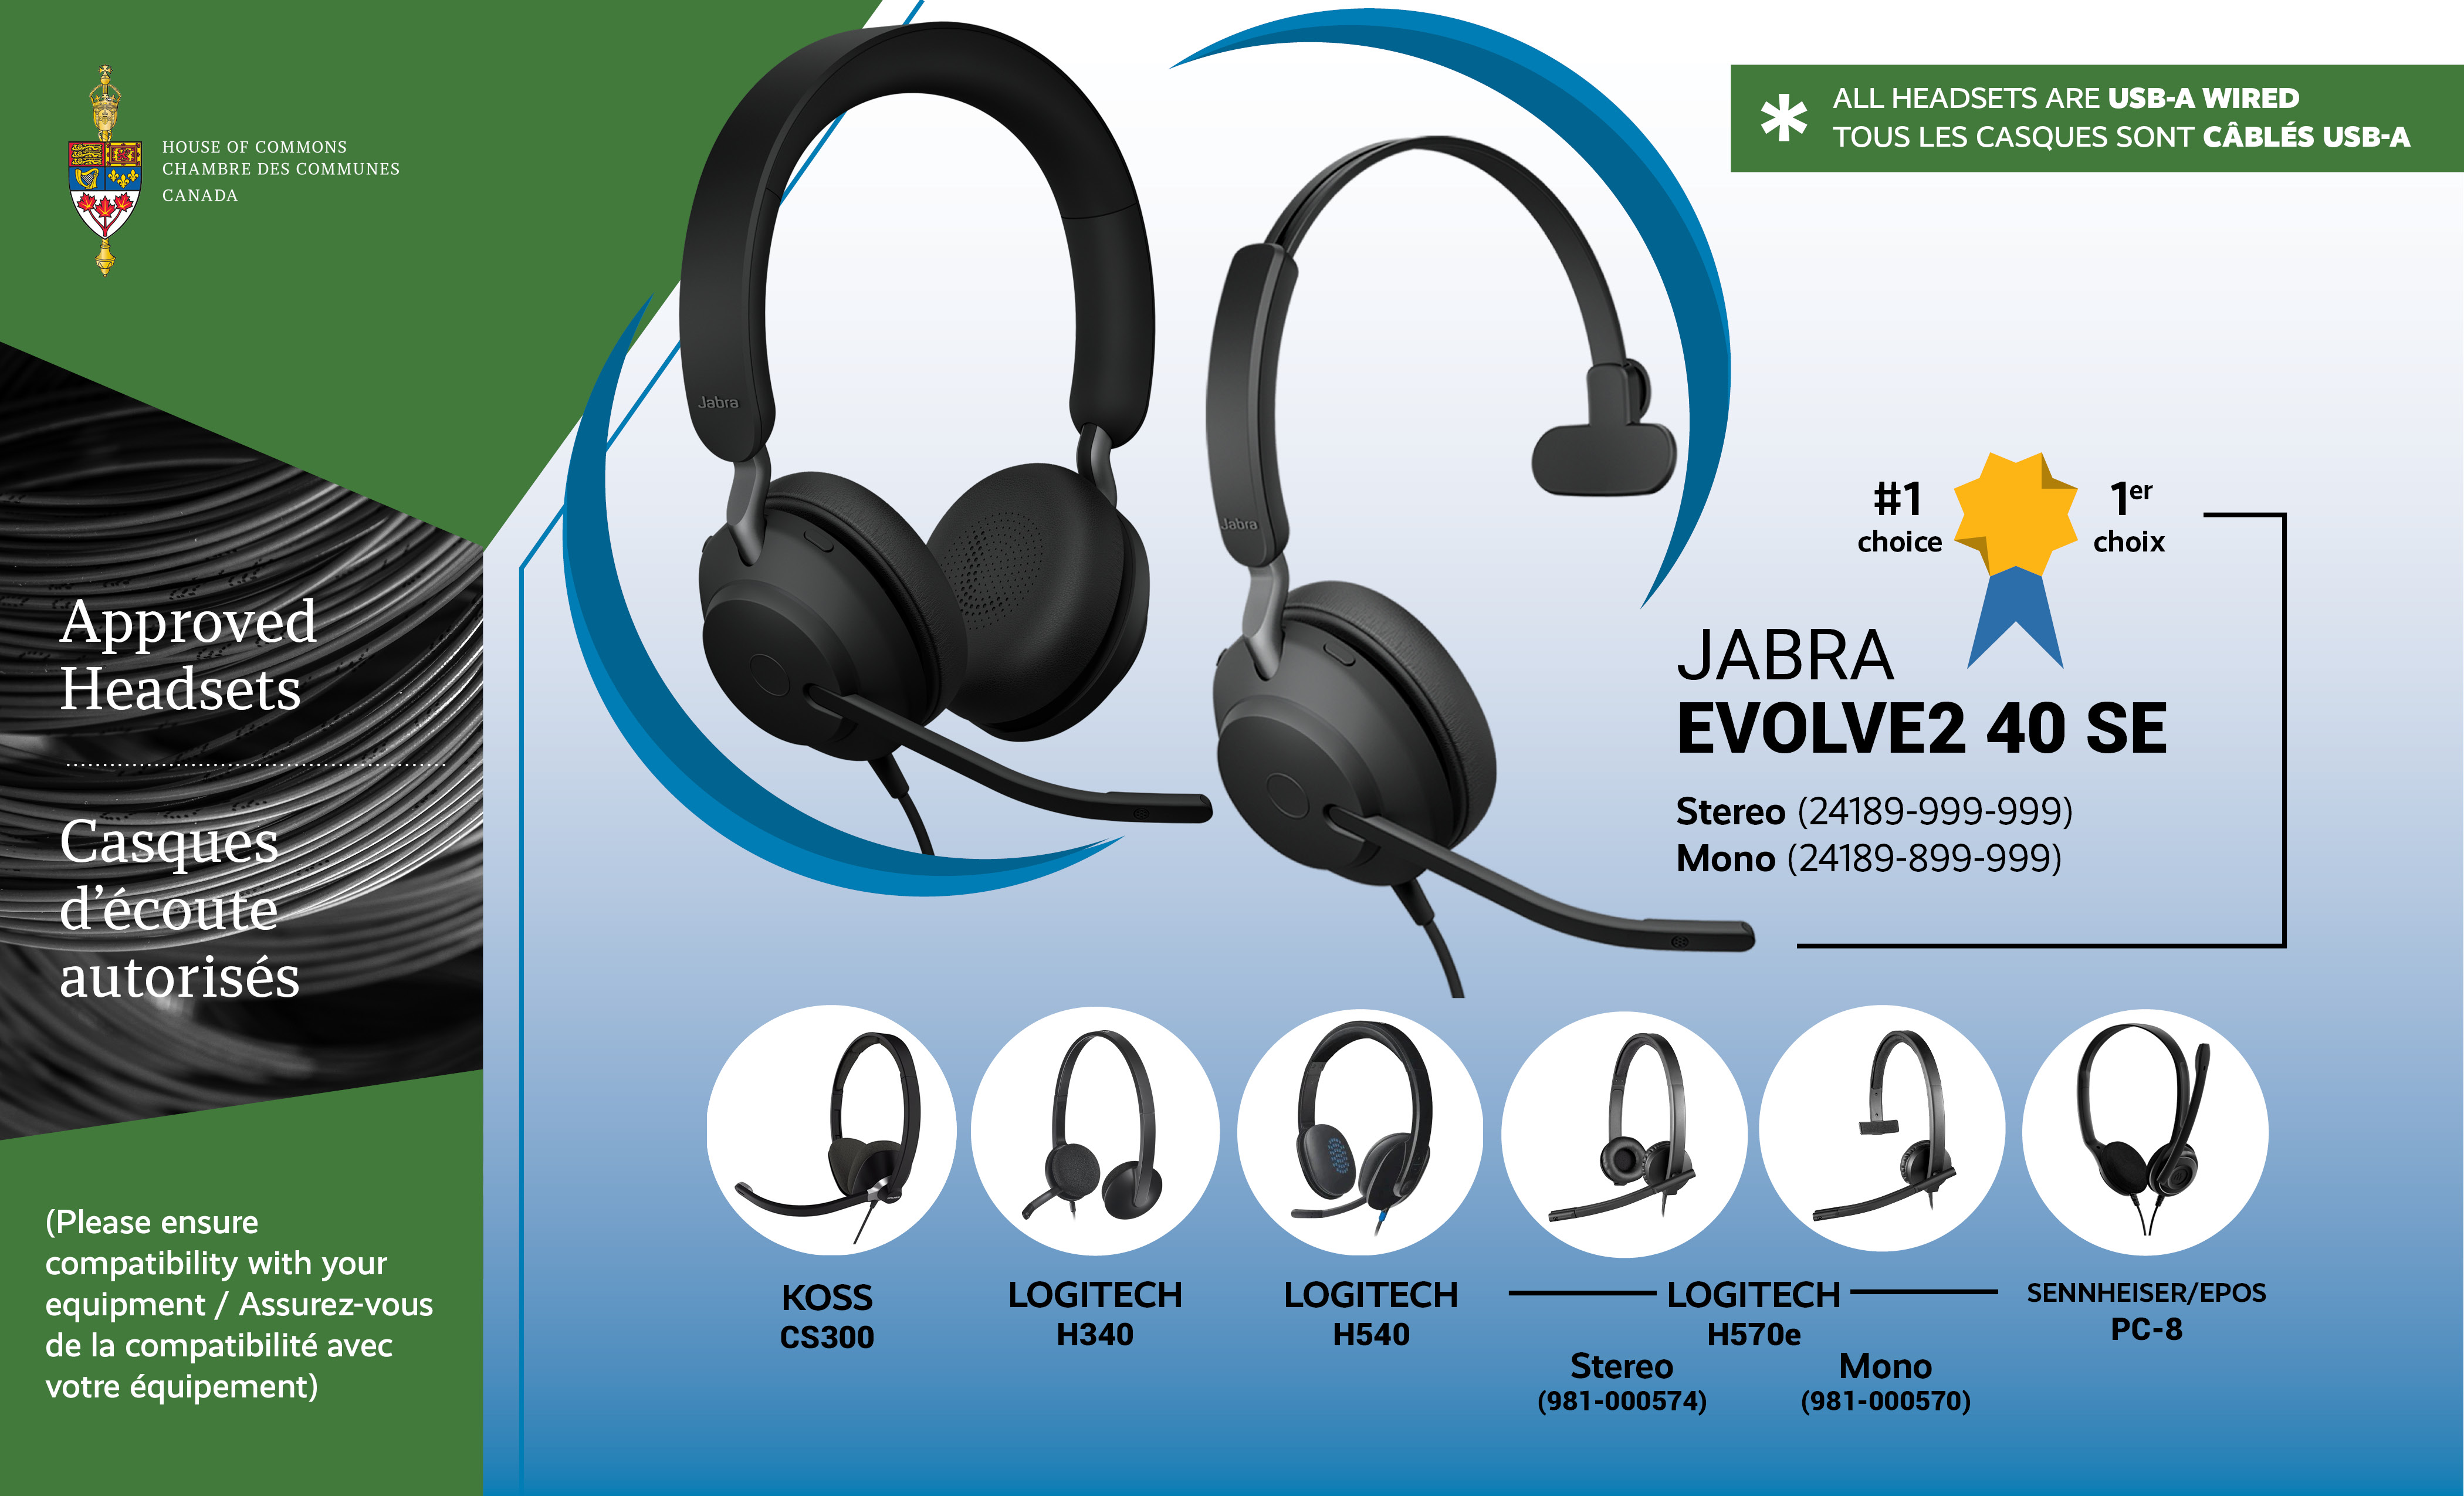 This graphic lists the six pre-approved headsets that can be used for appearances before committee meetings. The number one choice is the Jabra Evolve2 40. The other choices are the following: Sennheiser/EPOS PC-8 USB, Logitech zone wired, Logitech H570e (Stereo and Mono), Logitech H340 and Koss CS300. All headsets are USB-A wired.